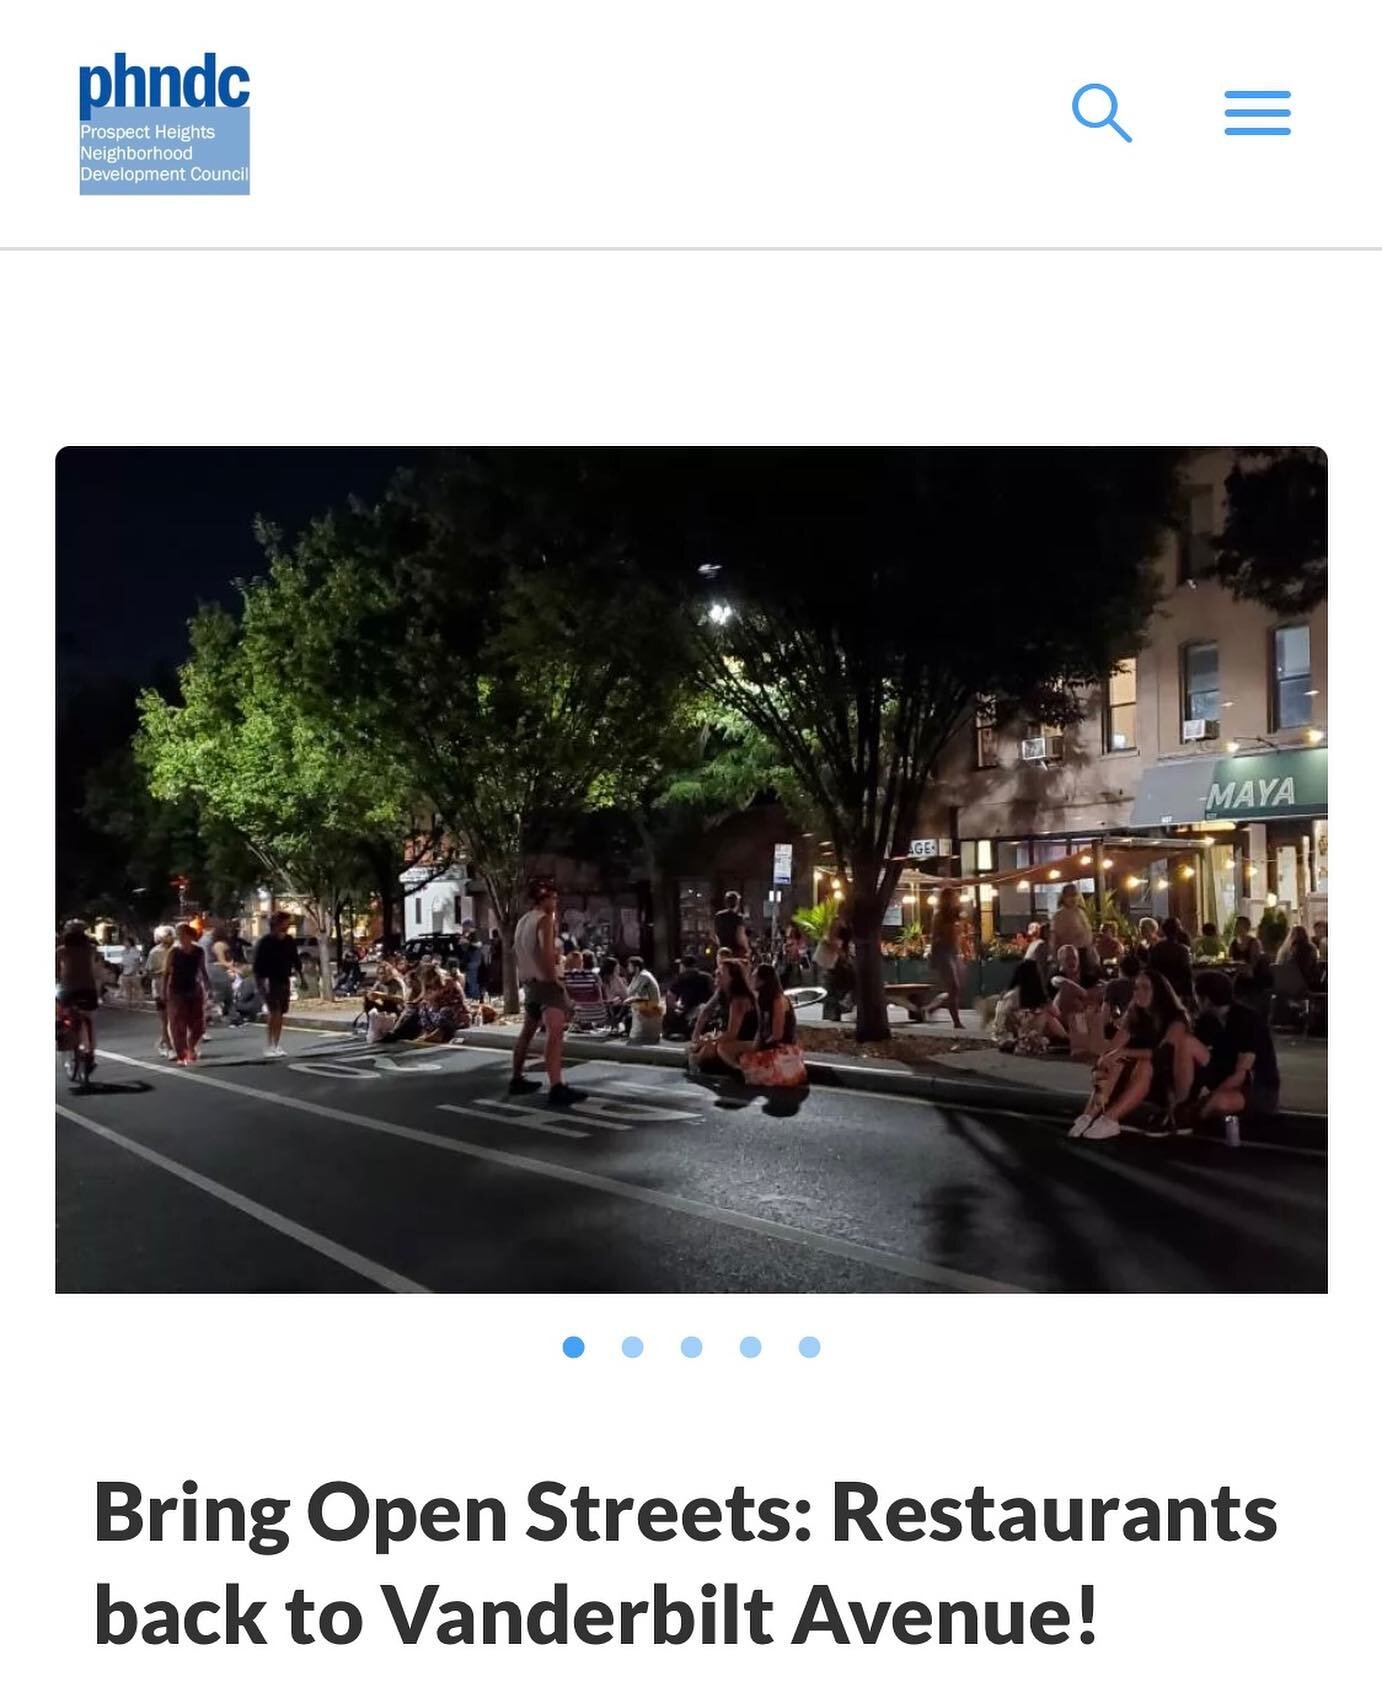 All! Open Streets last year was such a treat. It helped restaurants, stores, families and neighbors. We&rsquo;re working hard to bring it back from April - November and to make it even better run and safer. To do that we need your help. The restauran